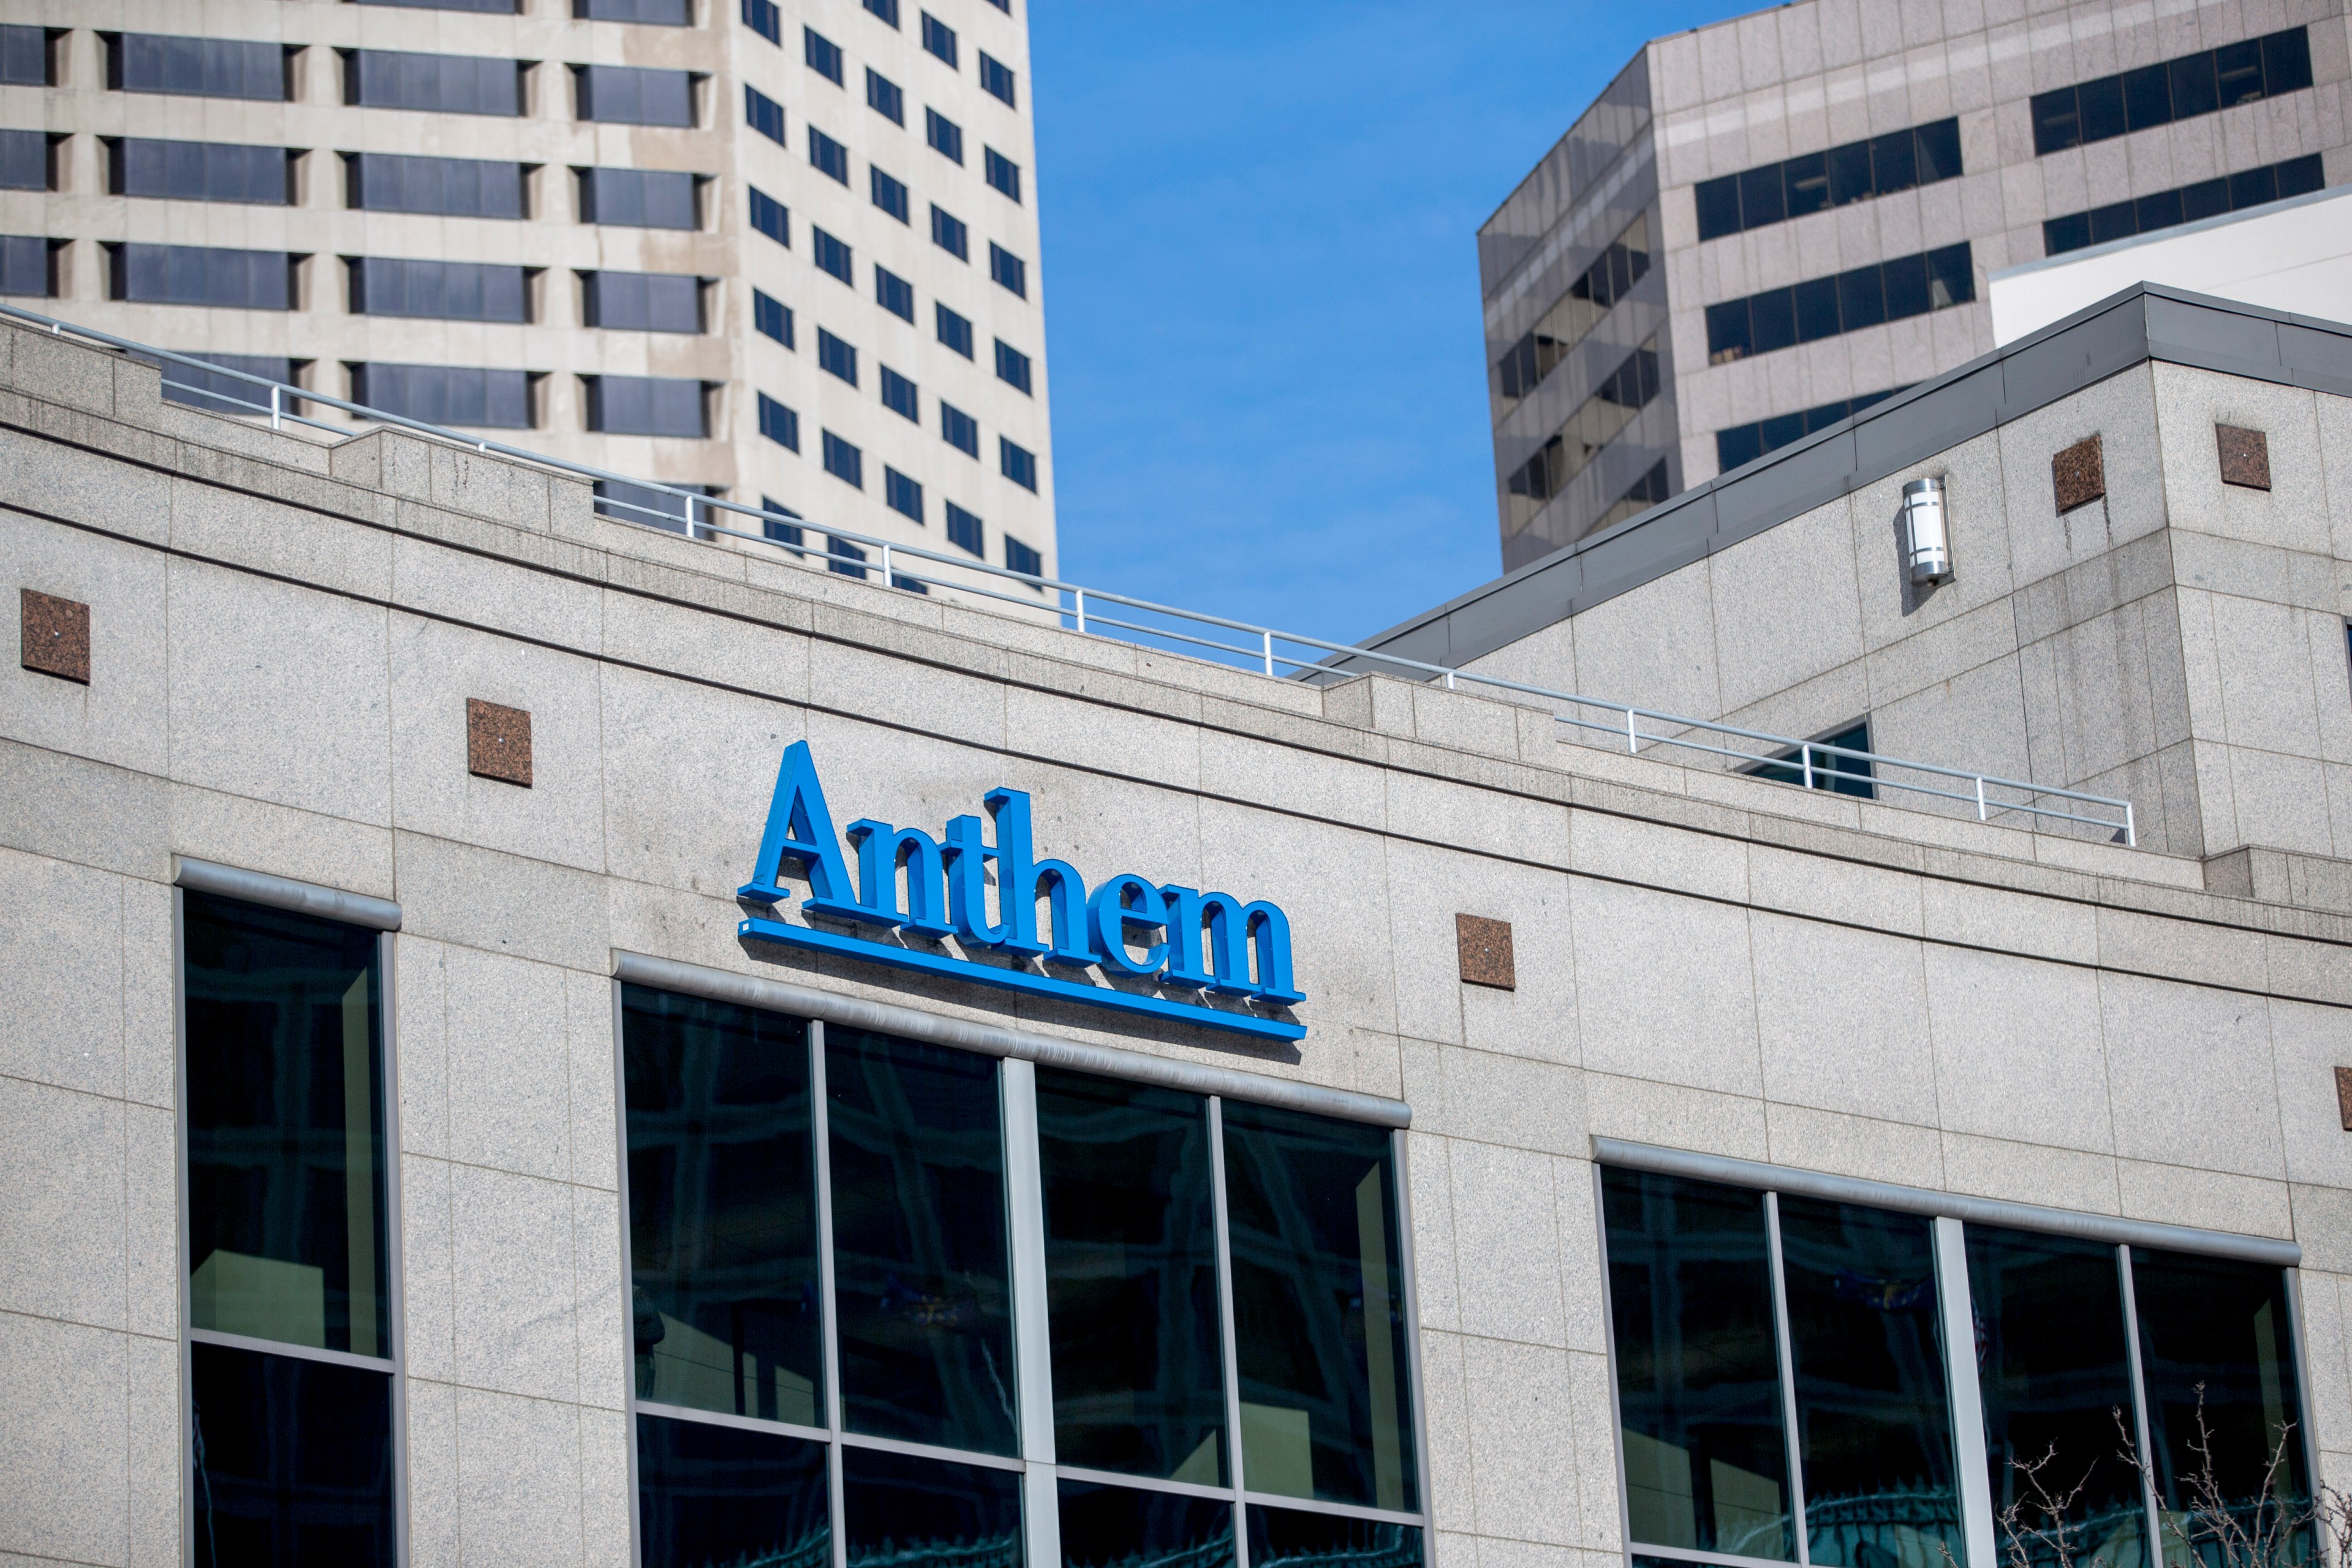 A building exterior with a blue sign for Anthem Blue Cross